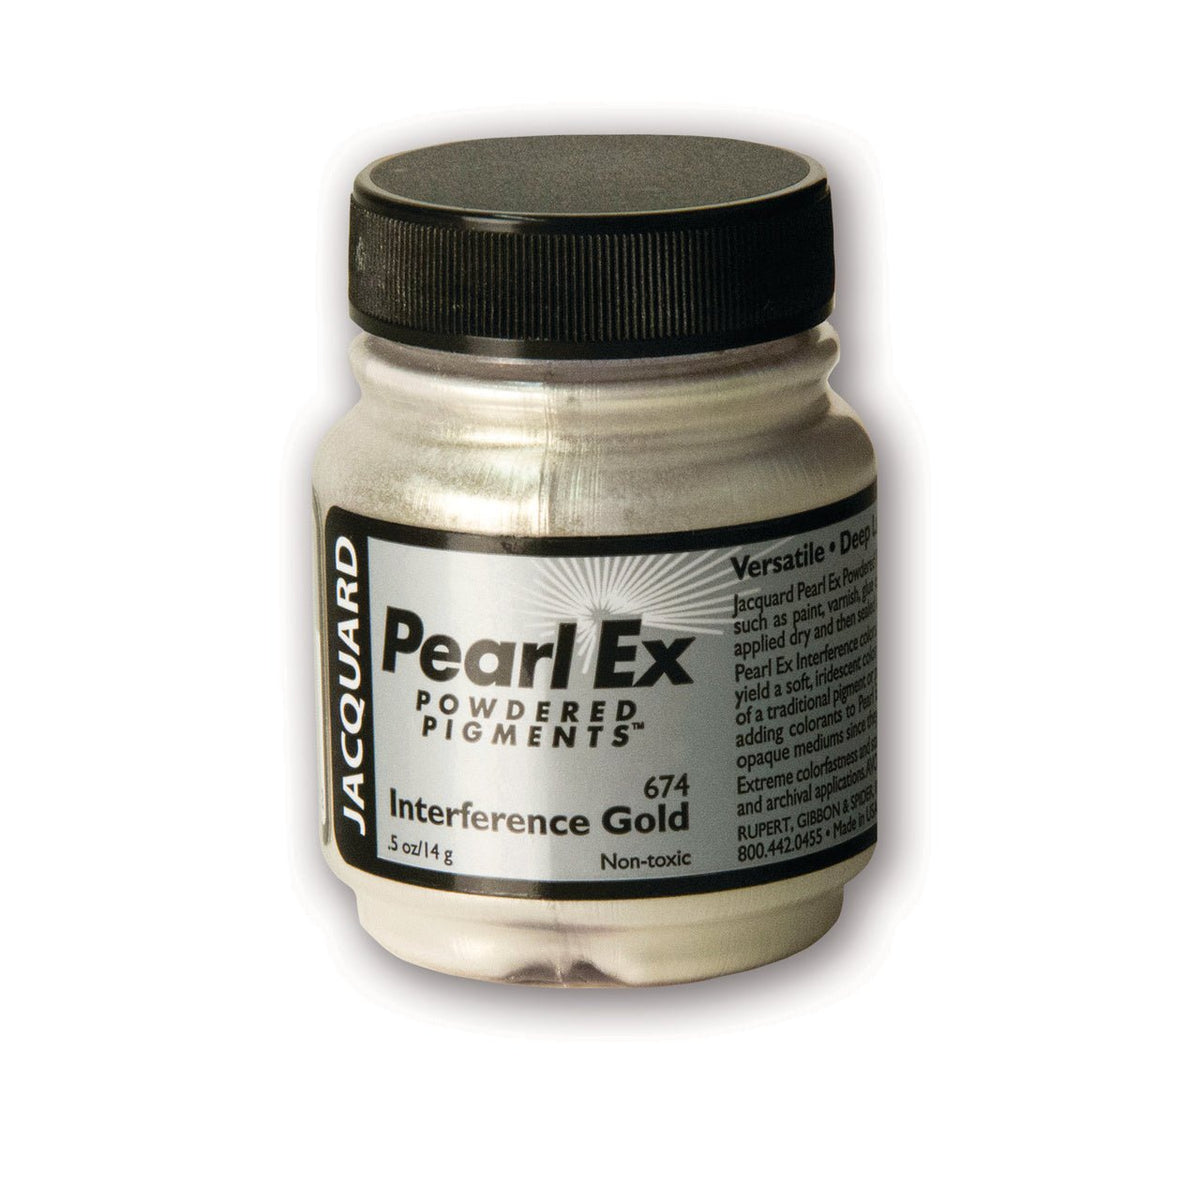 Jacquard Pearl-Ex Powdered Pigment .5 Oz Interference Gold - merriartist.com